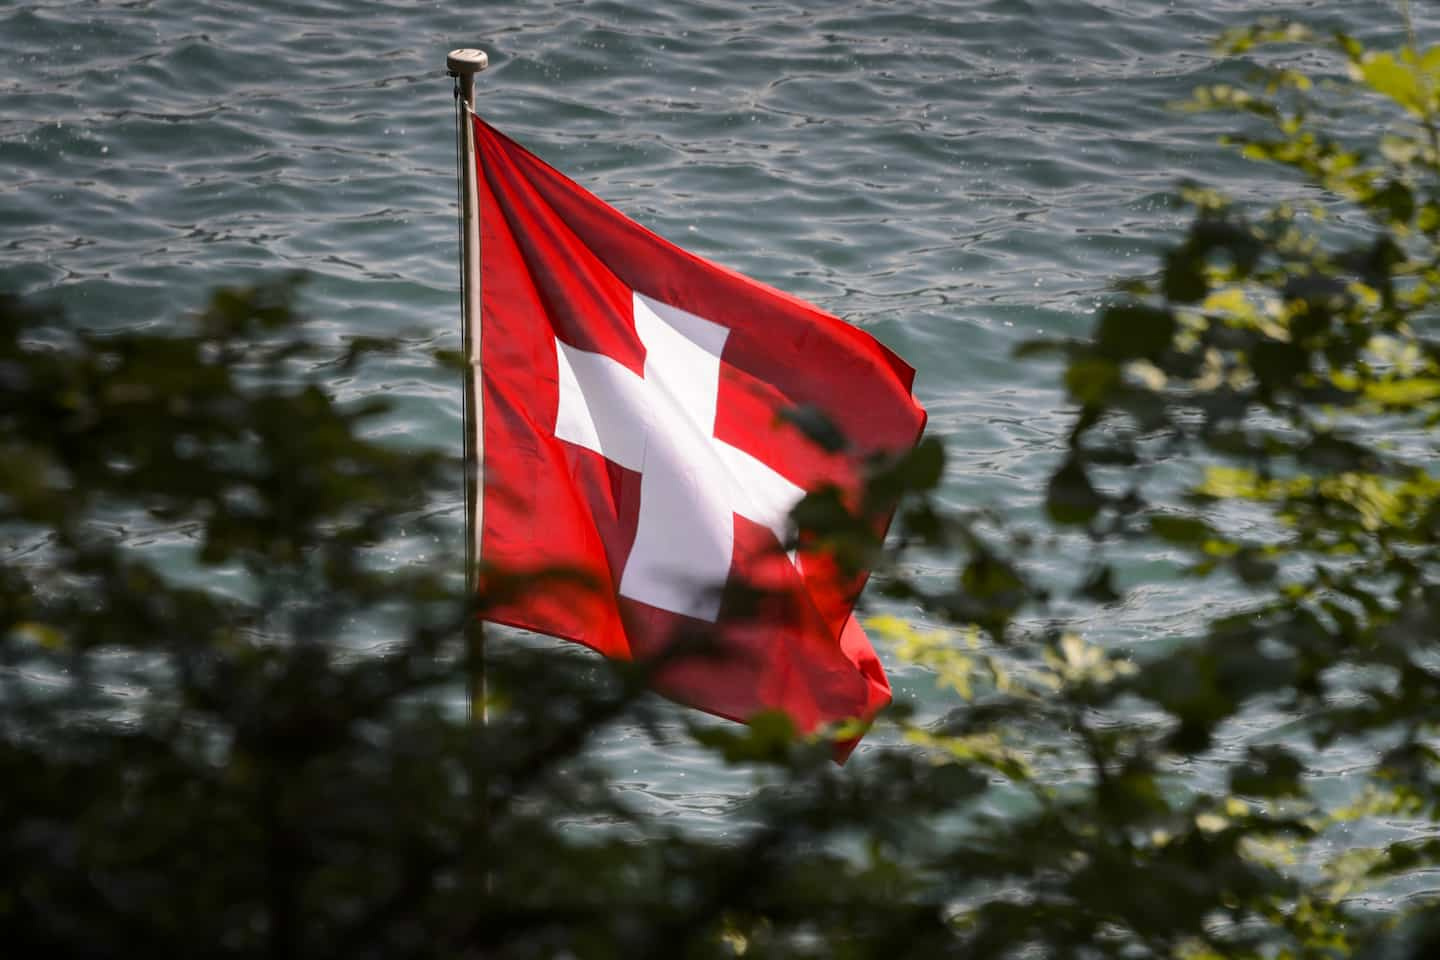 Switzerland, a paradise for Russian oligarchs